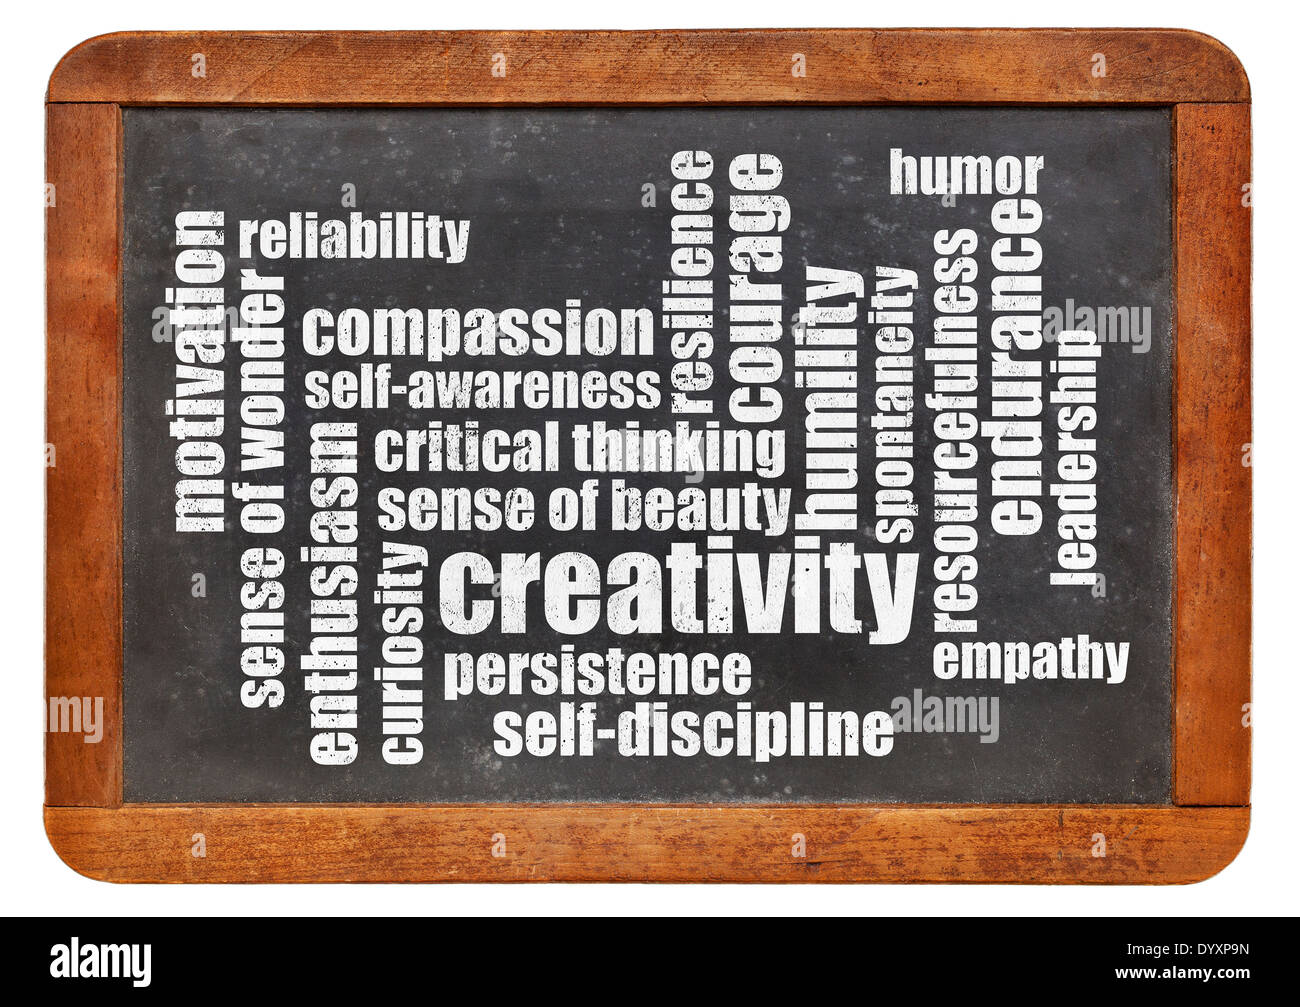 creativity, self-discipline and other personal qualities - a word cloud on a vintage blackboard Stock Photo